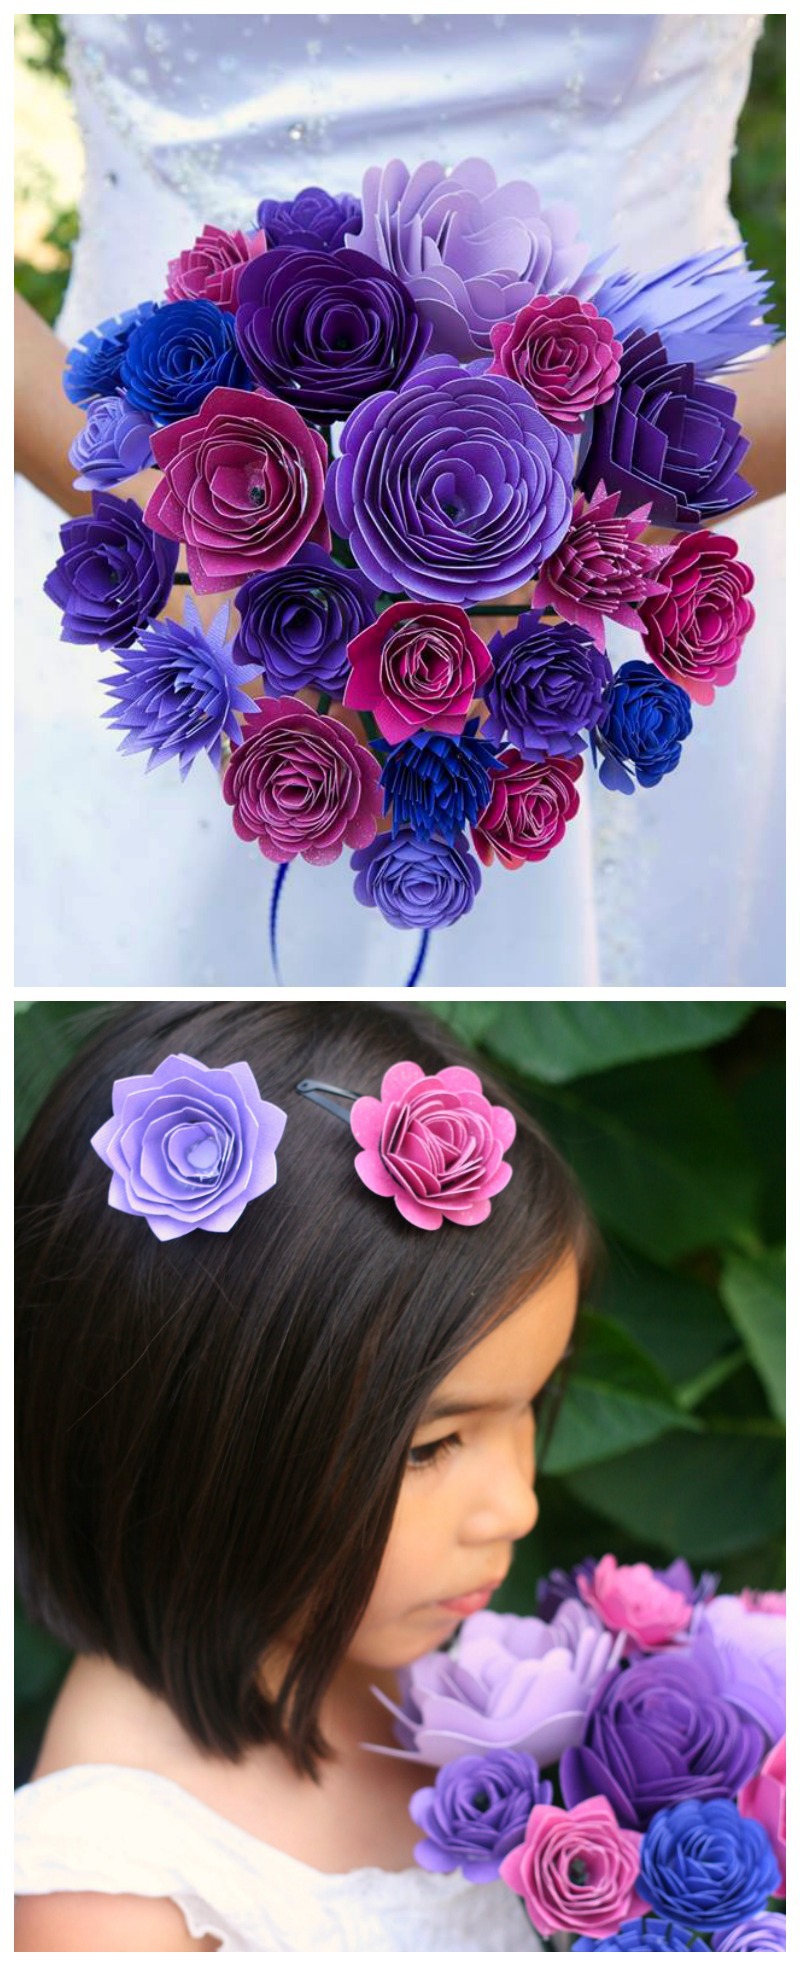 Beautiful Wedding Bouquet and Flower Girl Barrettes made from paper on the Cricut Explore.